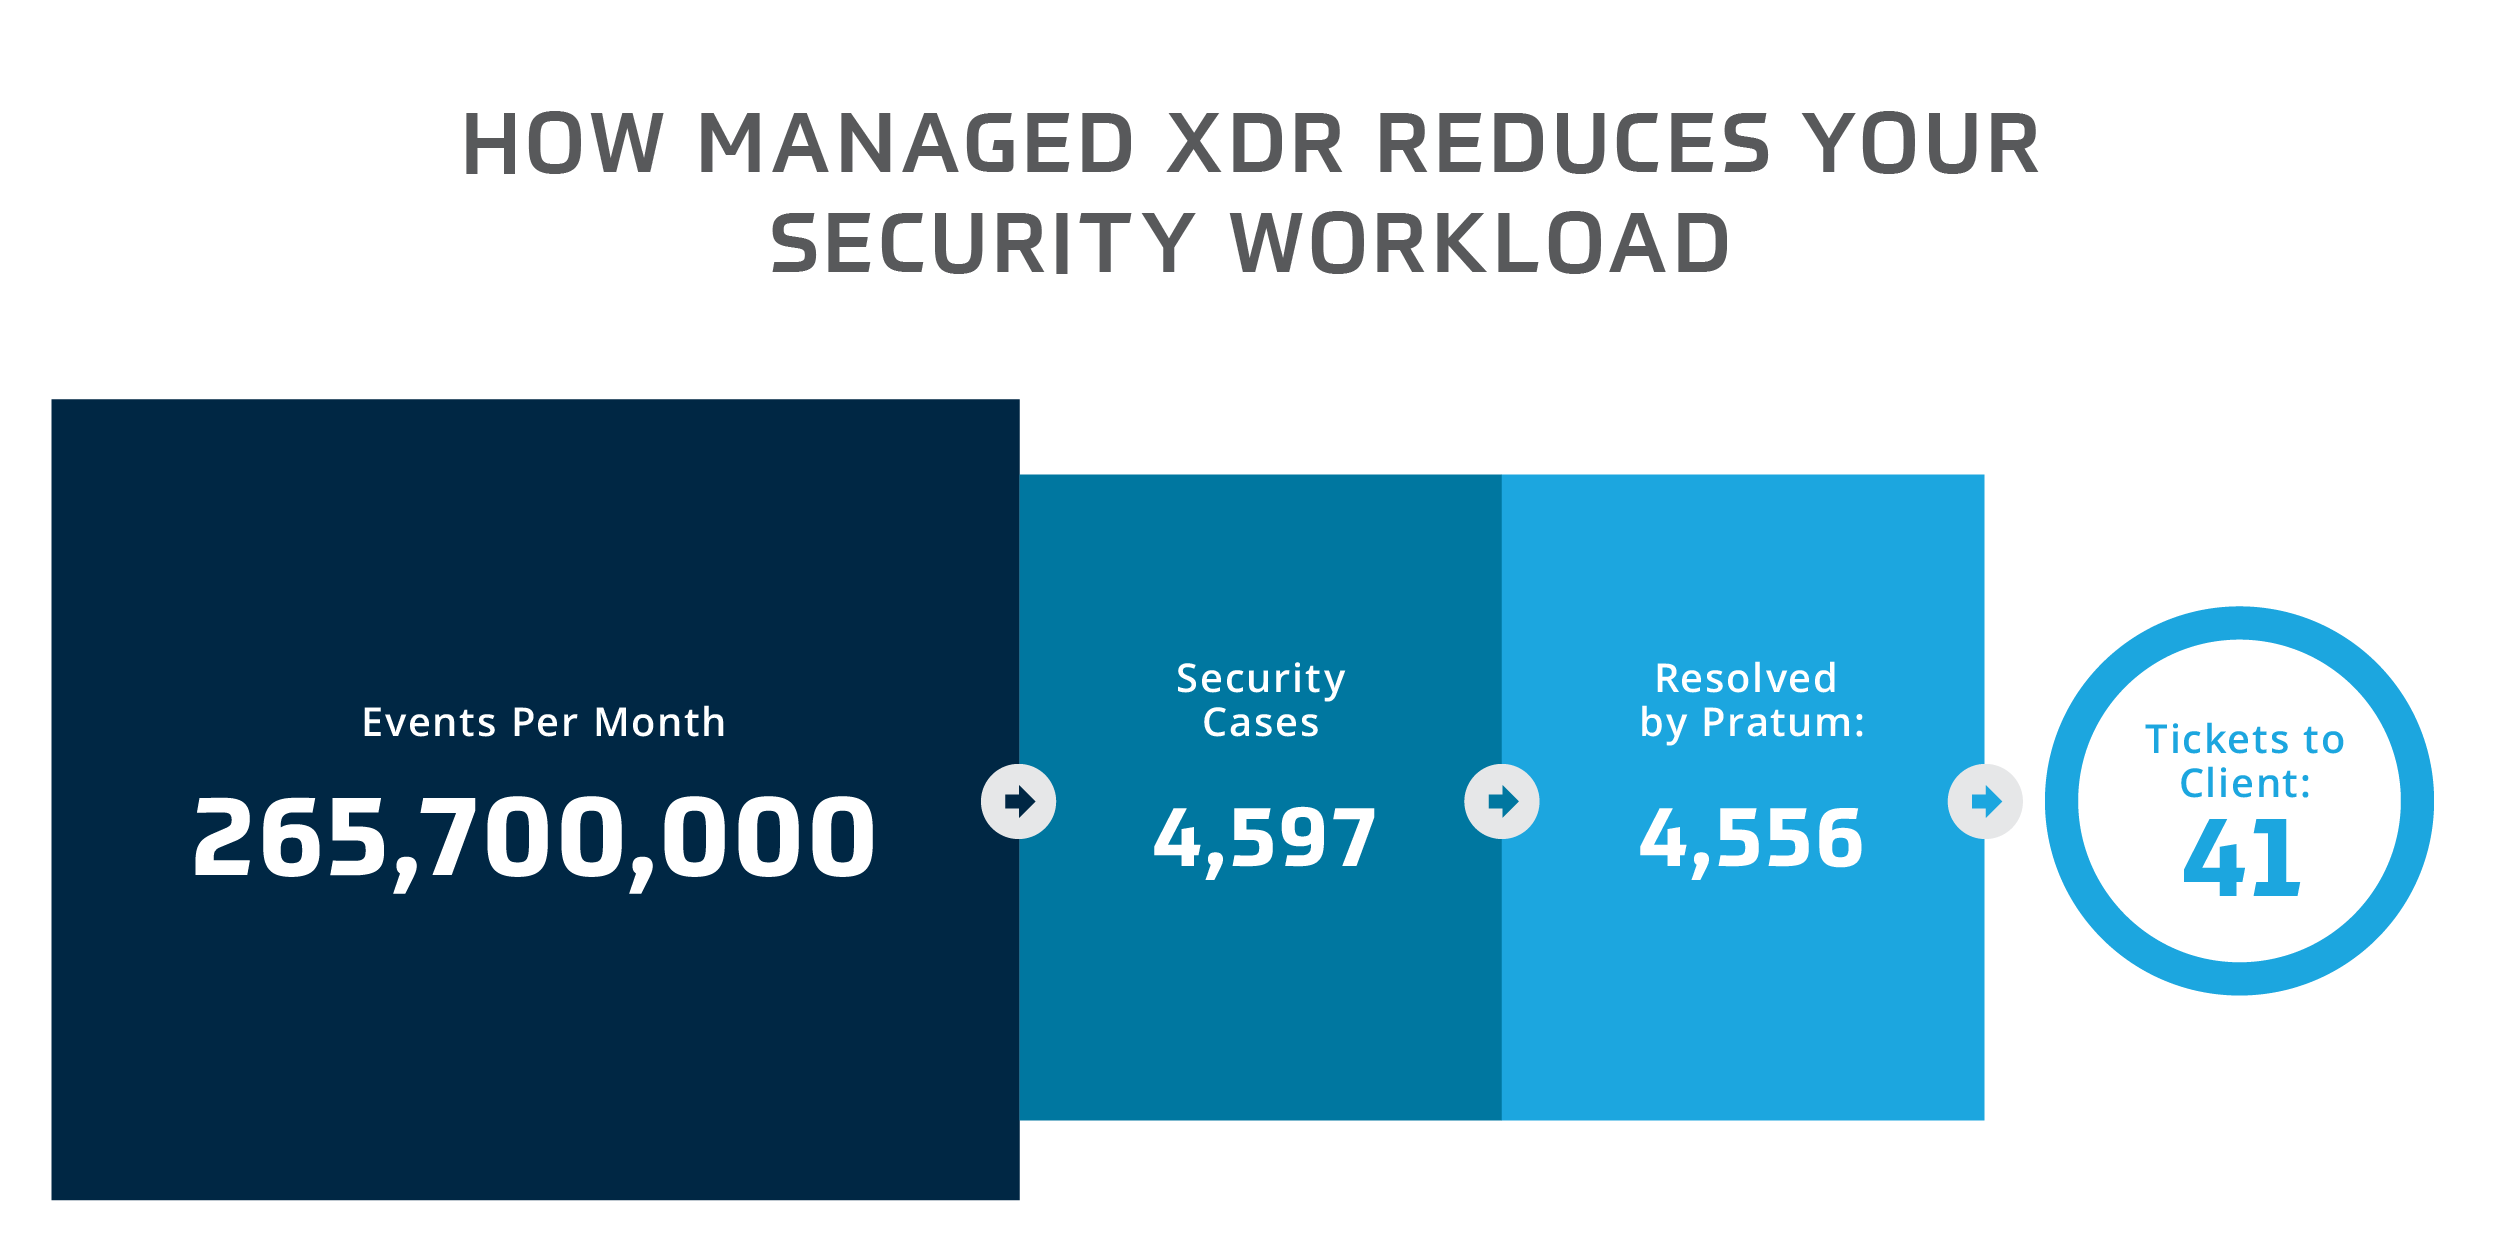 How Managed XDR Reduces Your Security Workload Statistics